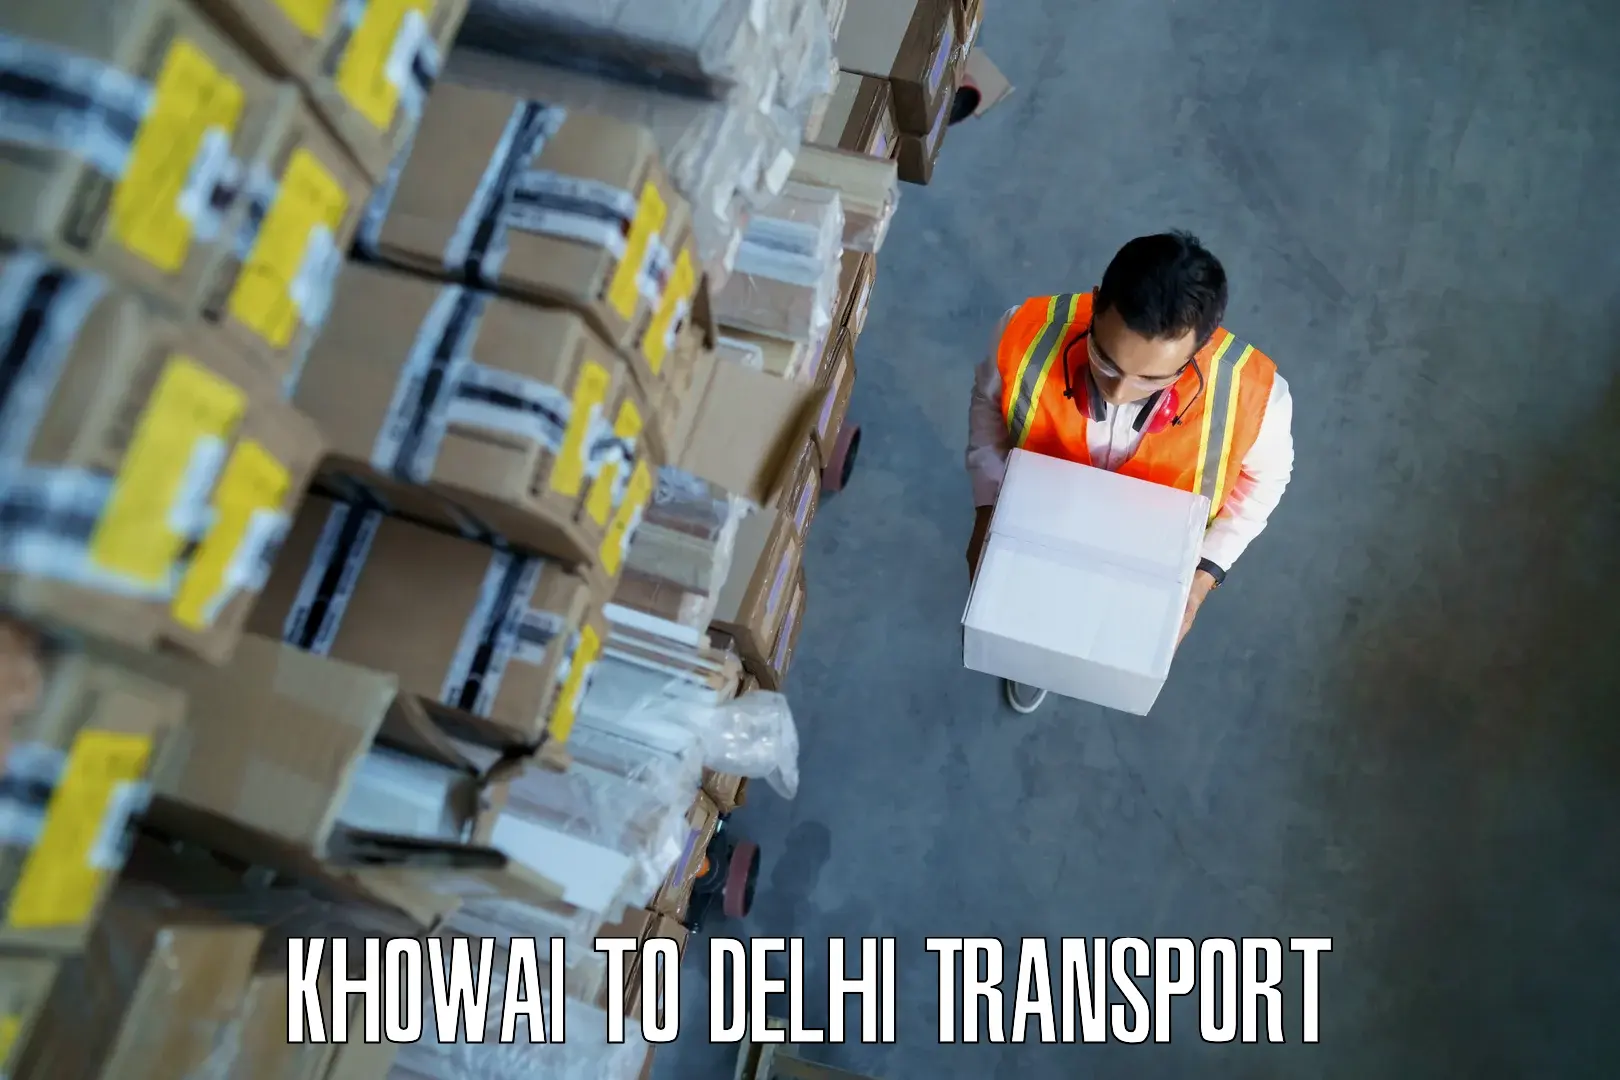 Transport in sharing Khowai to NCR